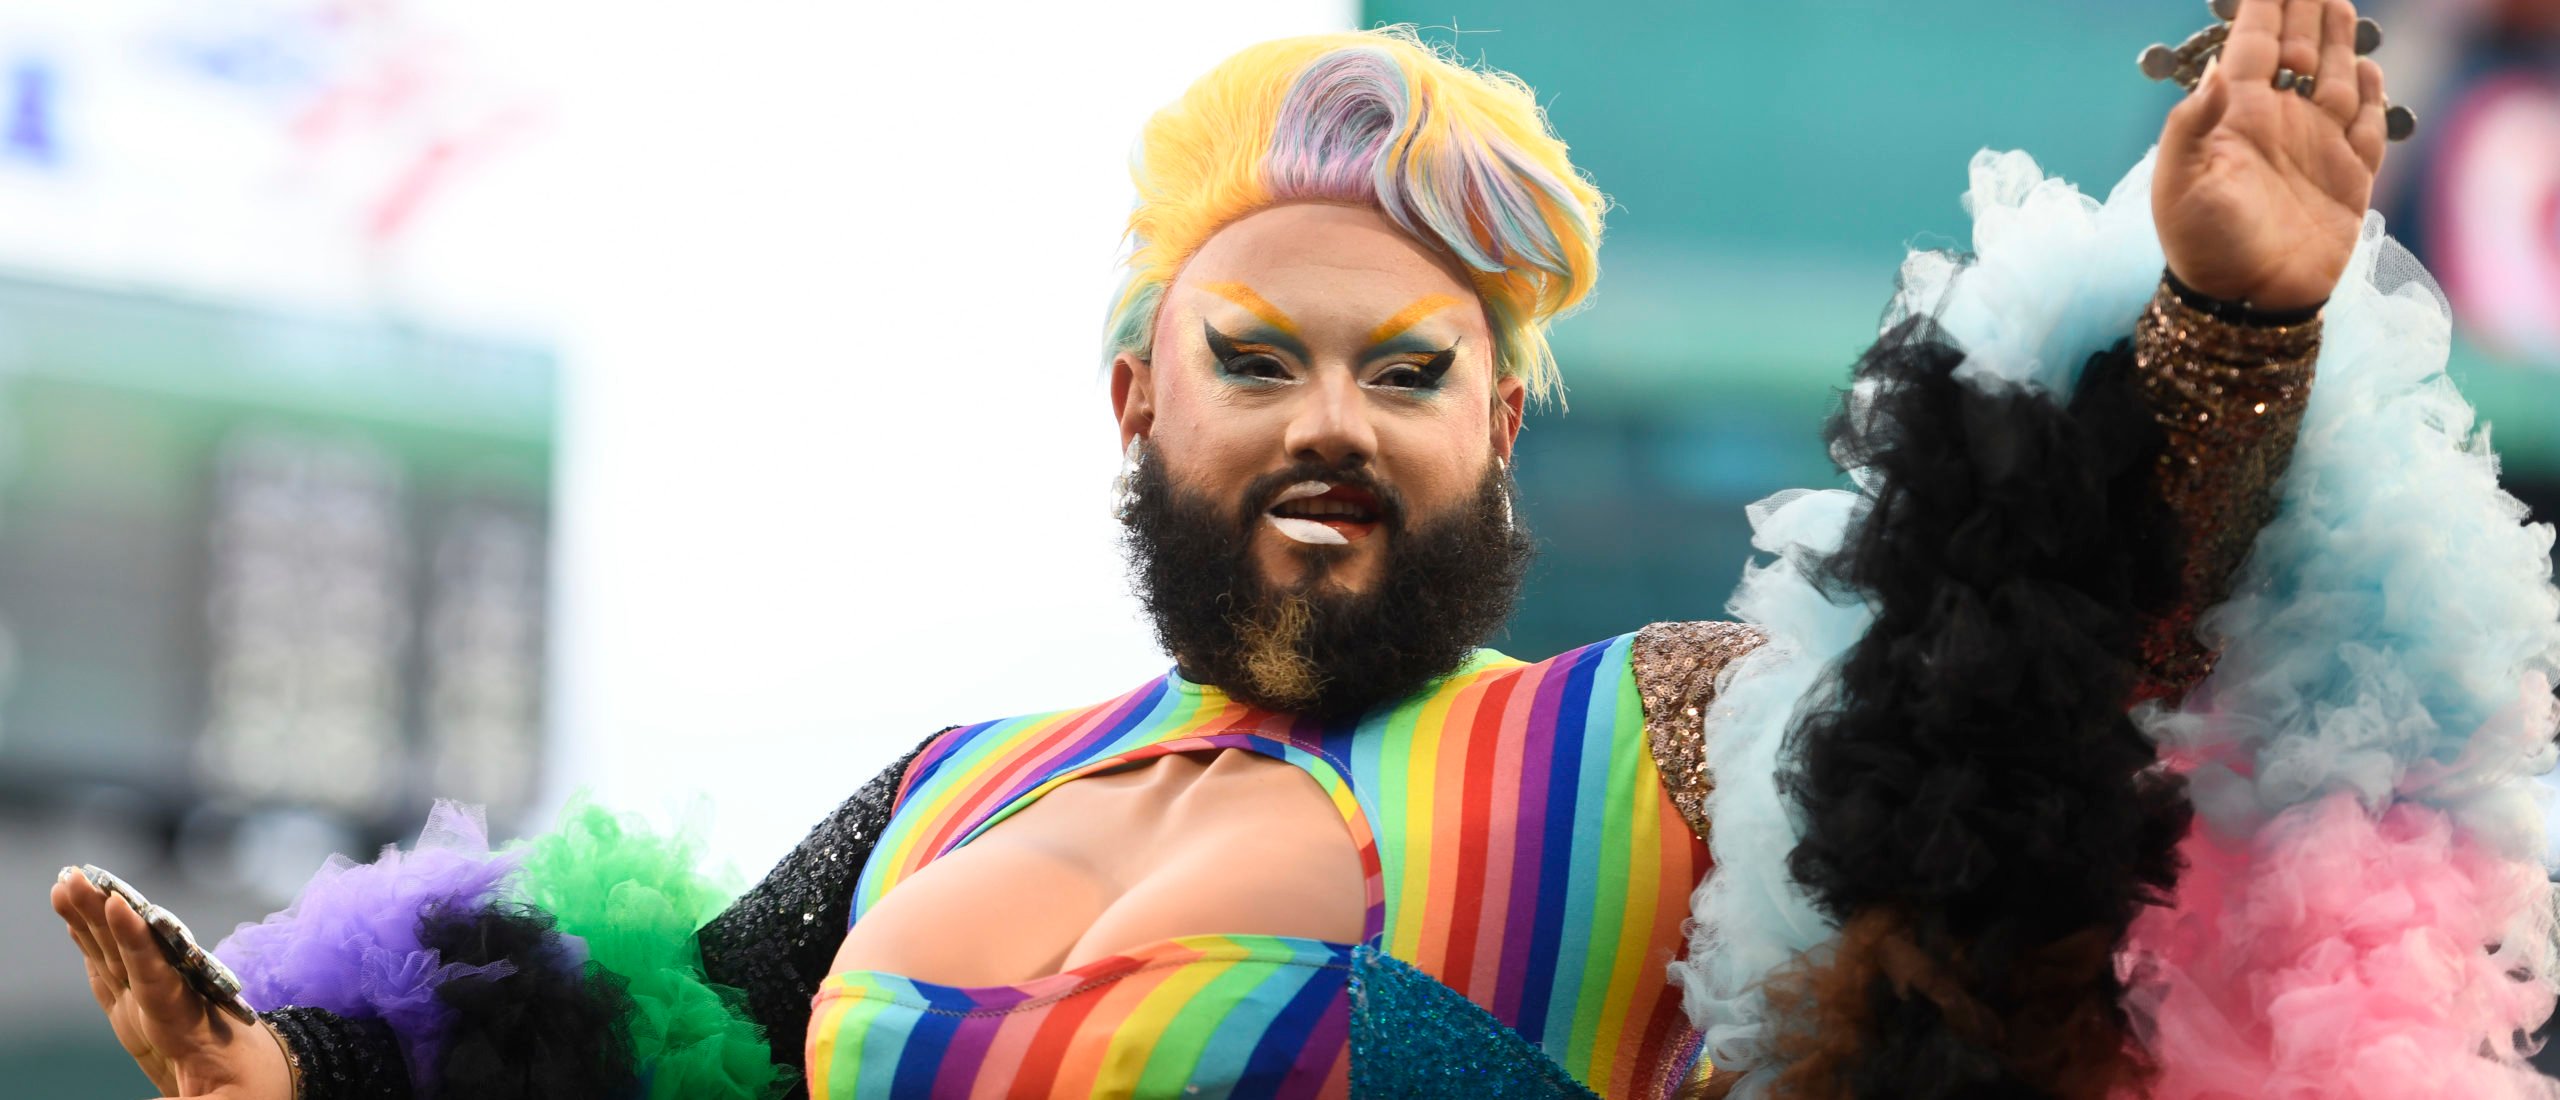 BOSTON, MASSACHUSETTS - JUNE 11: Drag queen performs during a pre-game ceremony in honor of pride night before a game between the Philadelphia Phillies and Boston Red Sox at Fenway Park on June 11, 2024 in Boston, Massachusetts. (Photo by Jaiden Tripi/Getty Images)